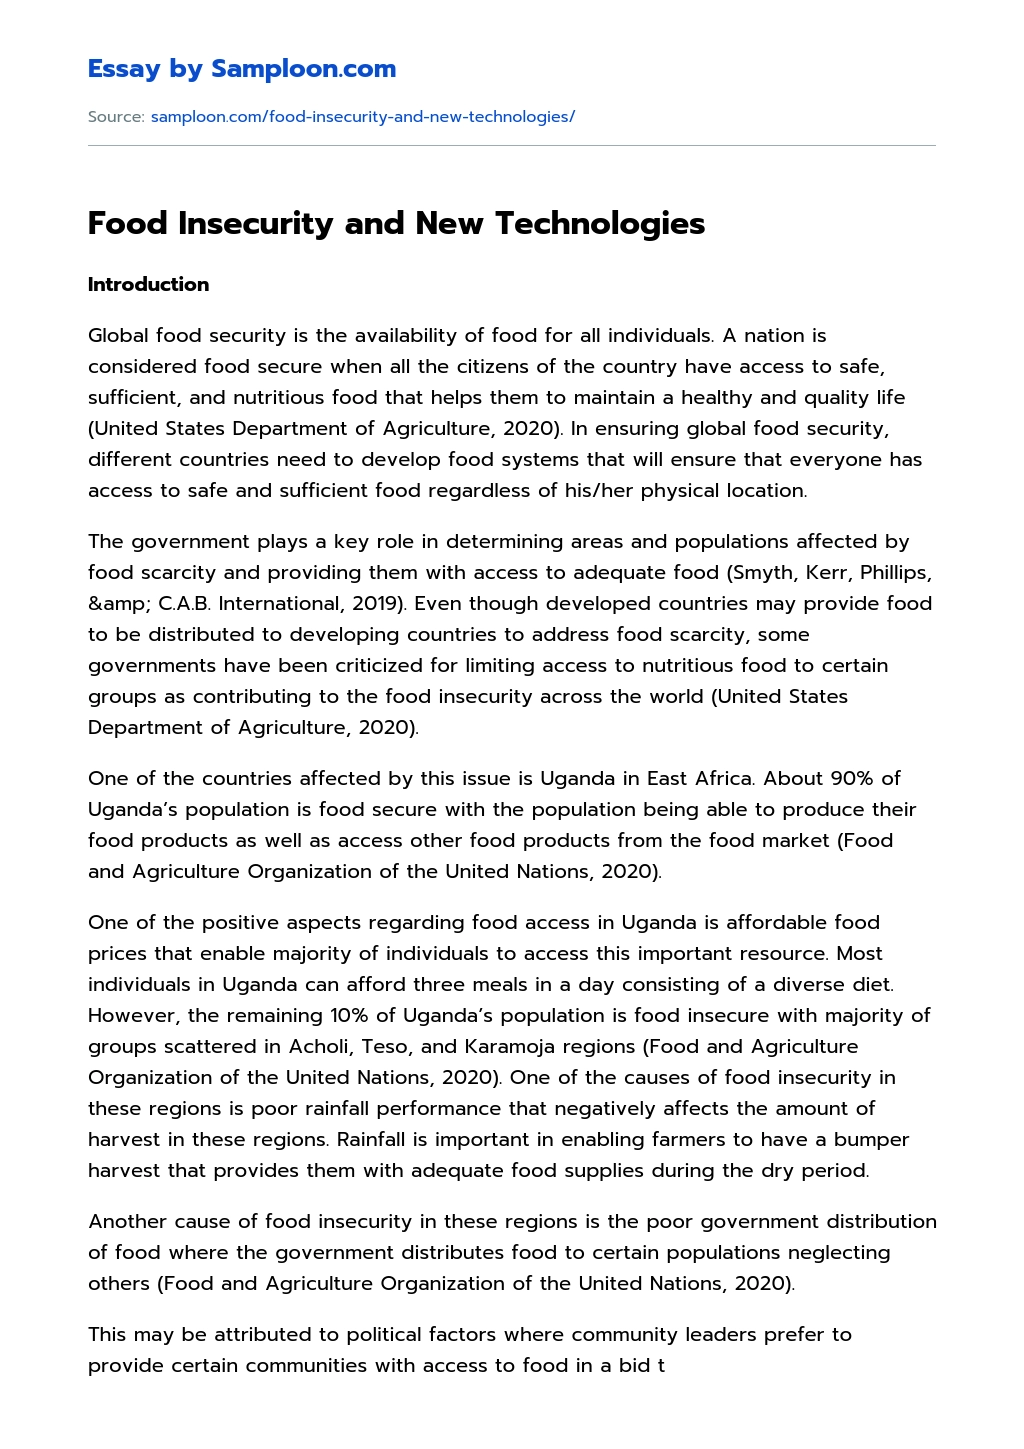 Food Insecurity and New Technologies essay